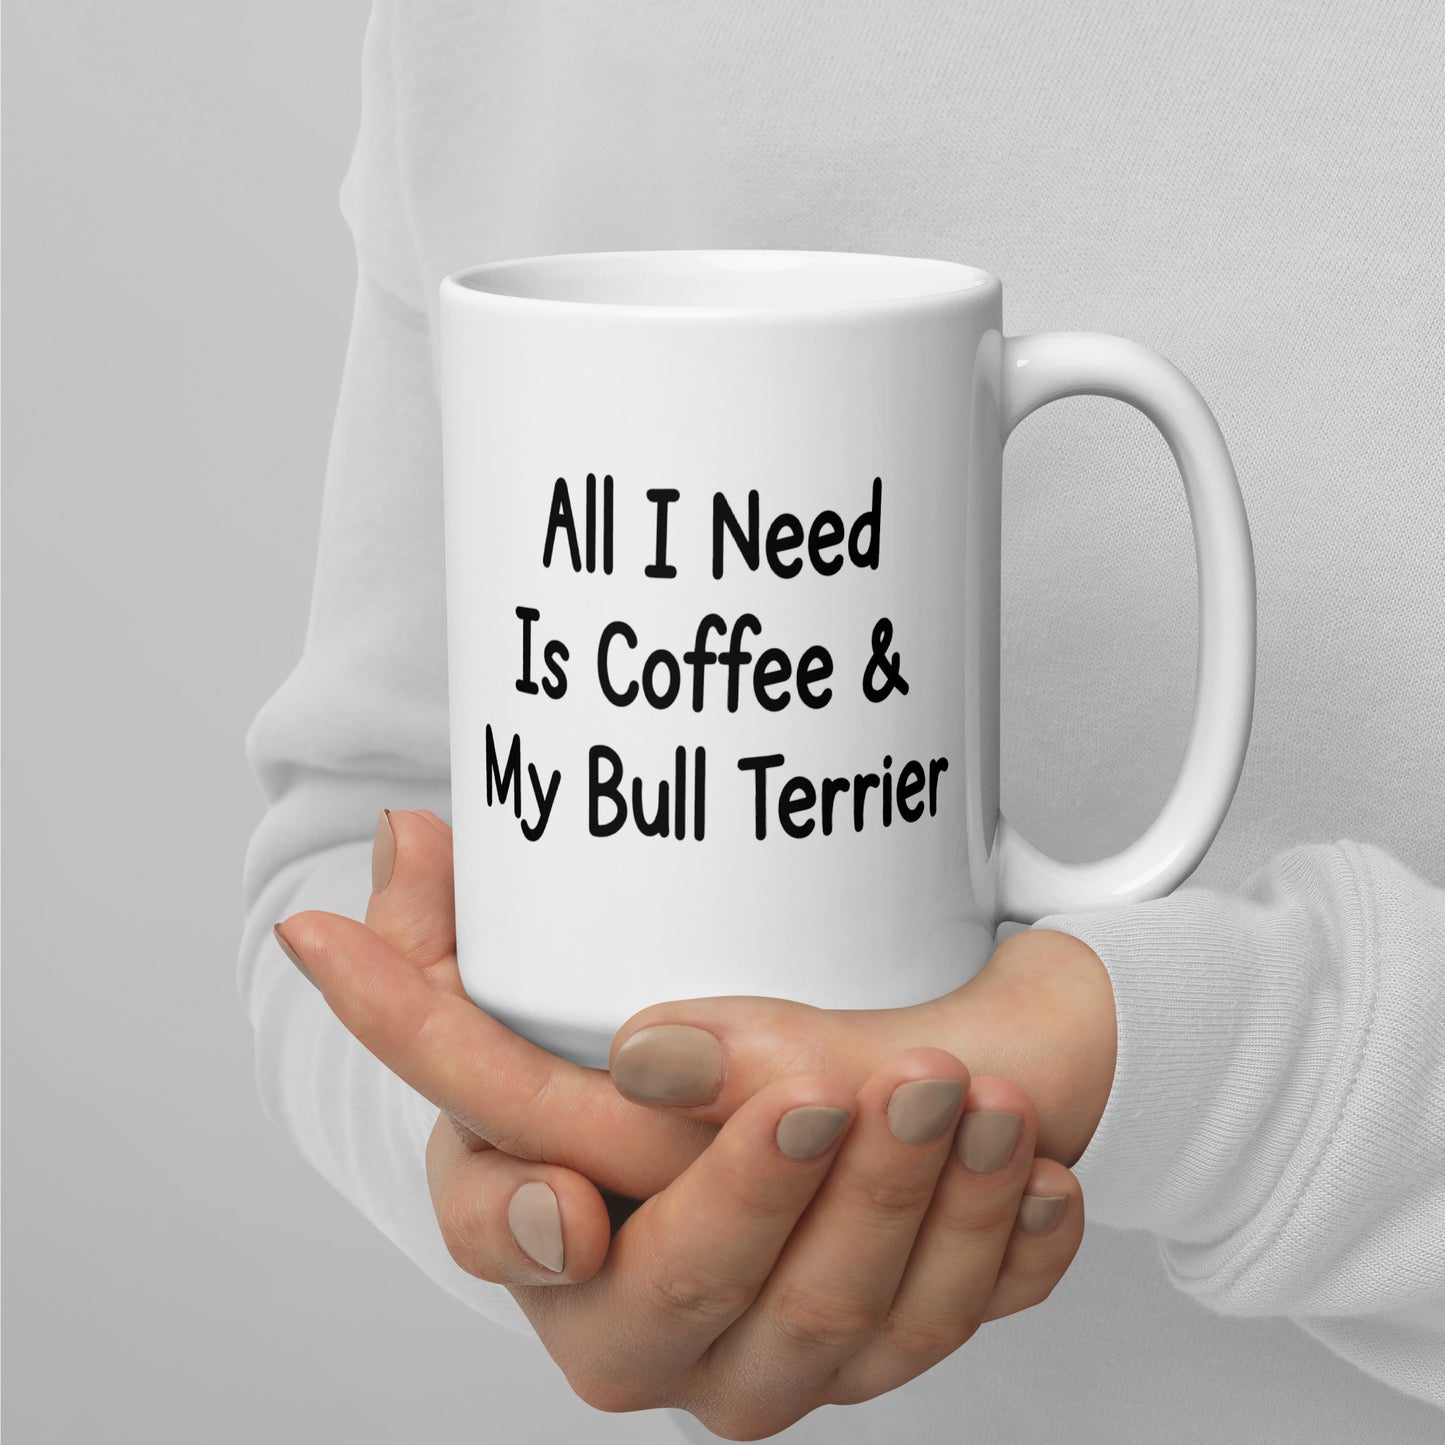 All I need is coffee & my Bull Terrier mug by Dog Artistry.